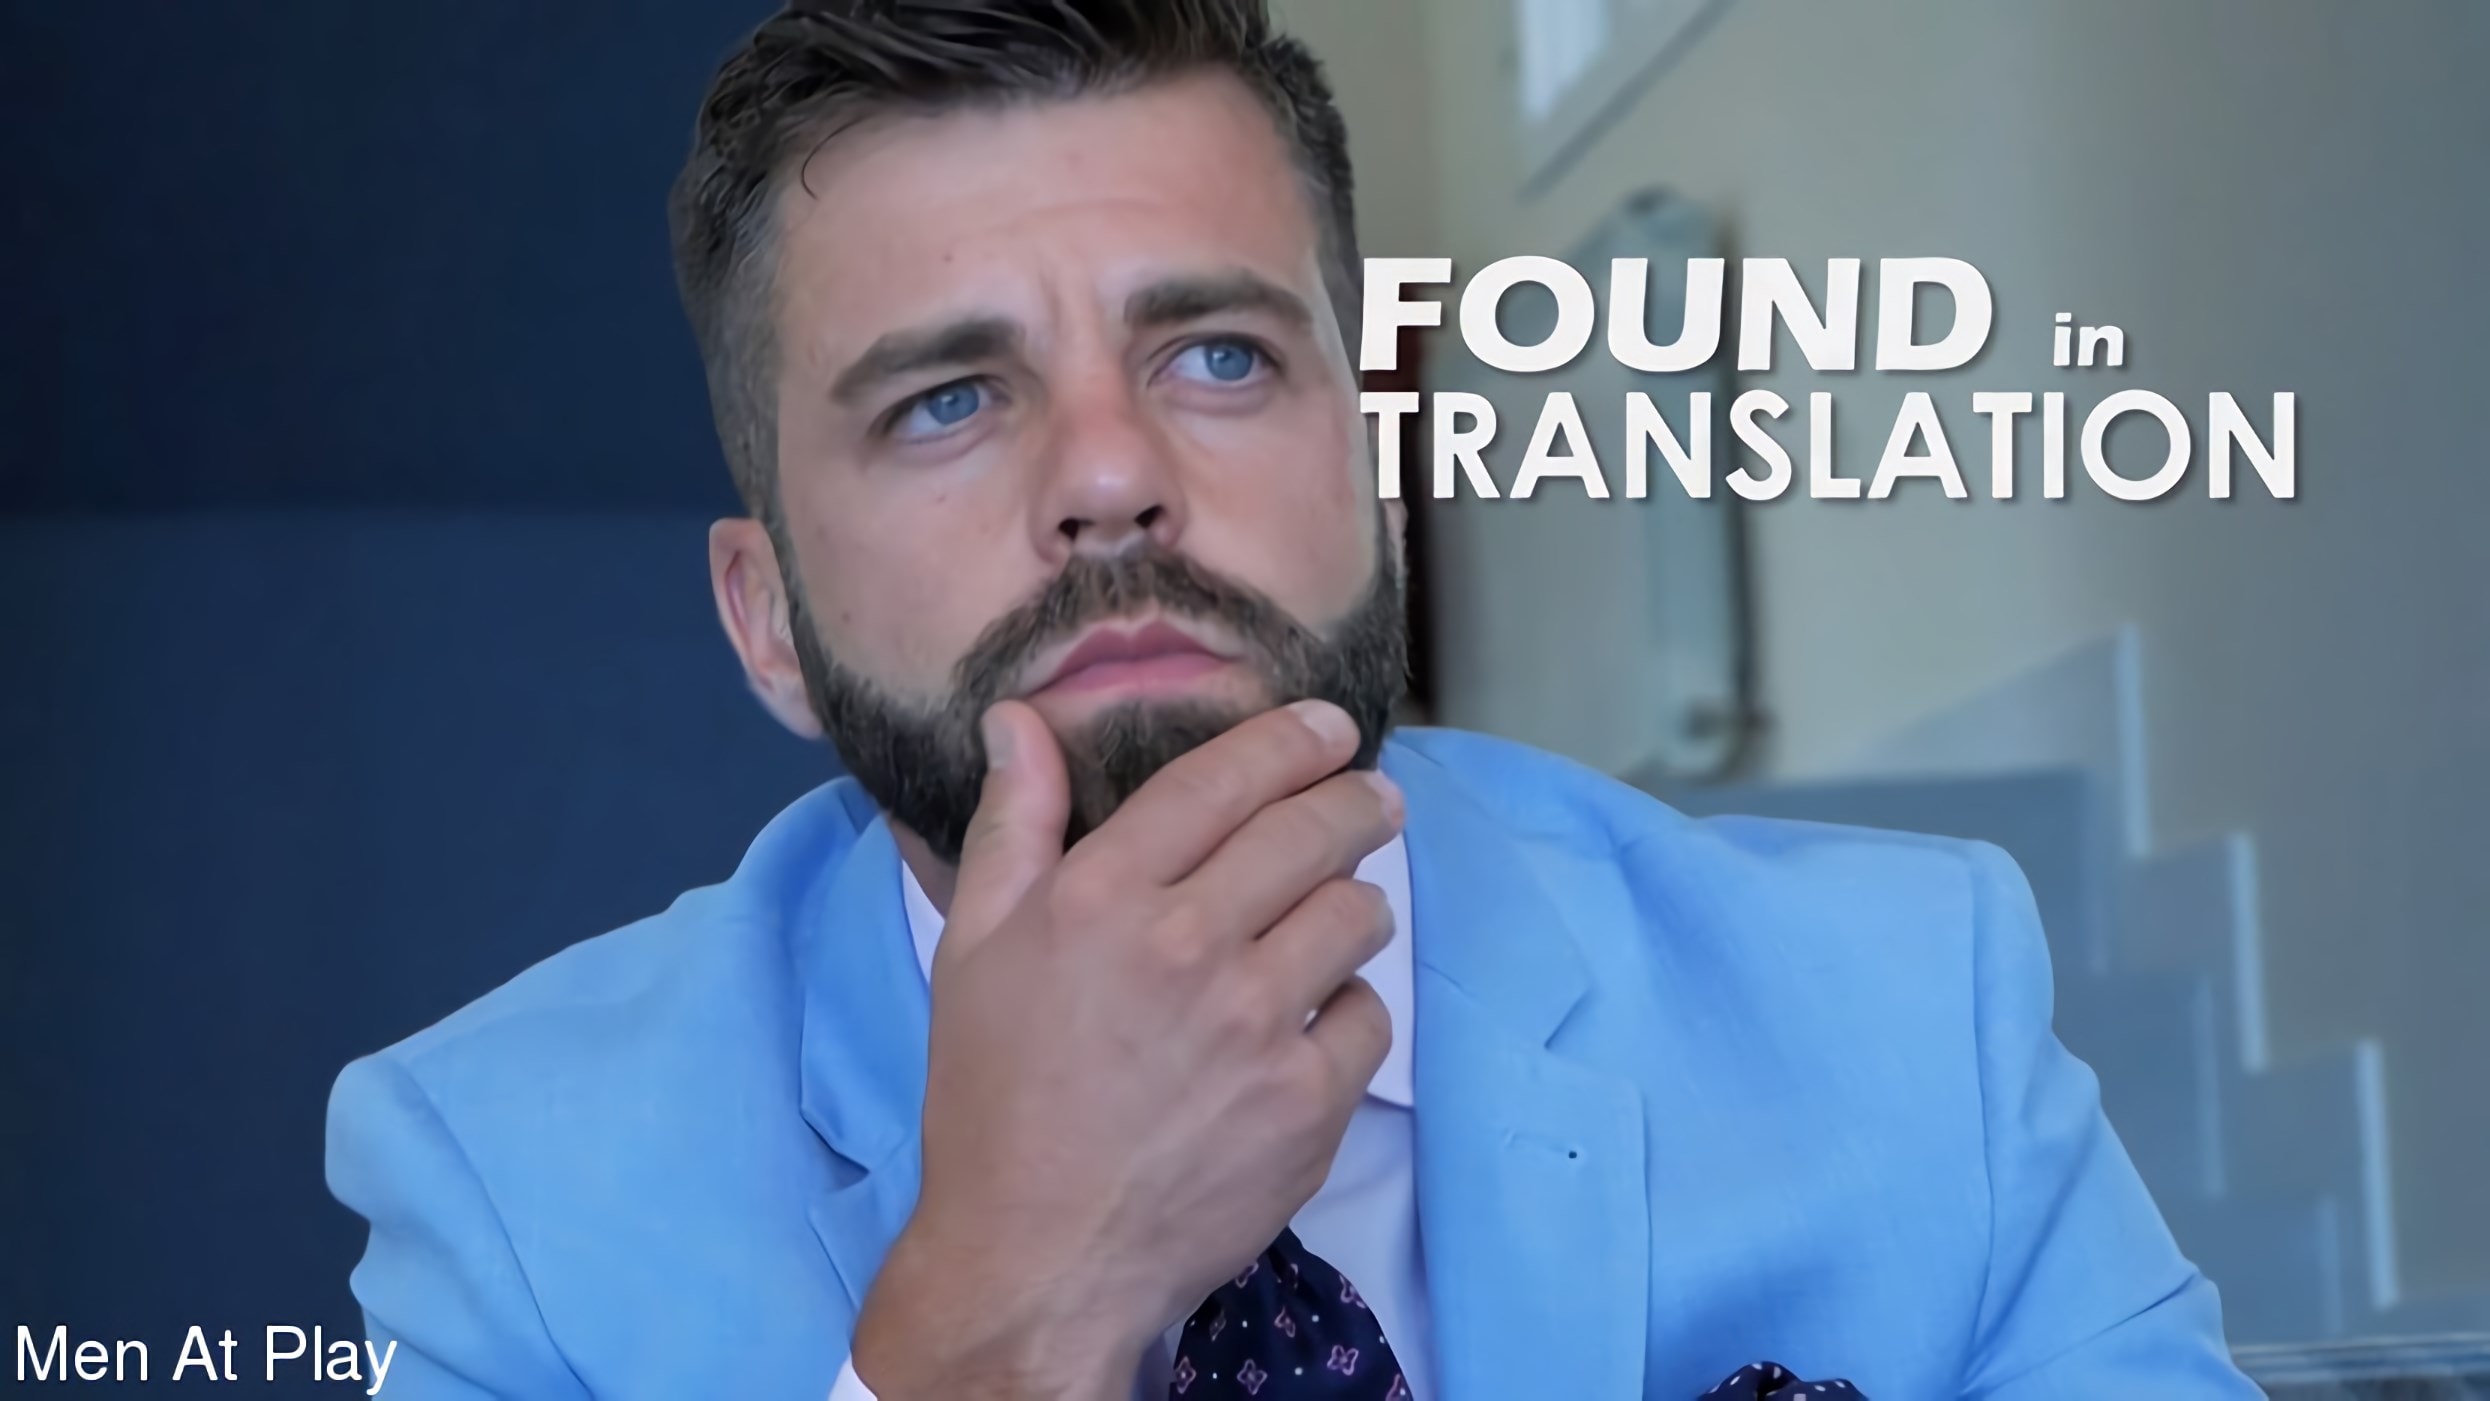 Kink Partners Gay 'FOUND IN TRANSLATION' starring Hector De Silva (Photo 1)